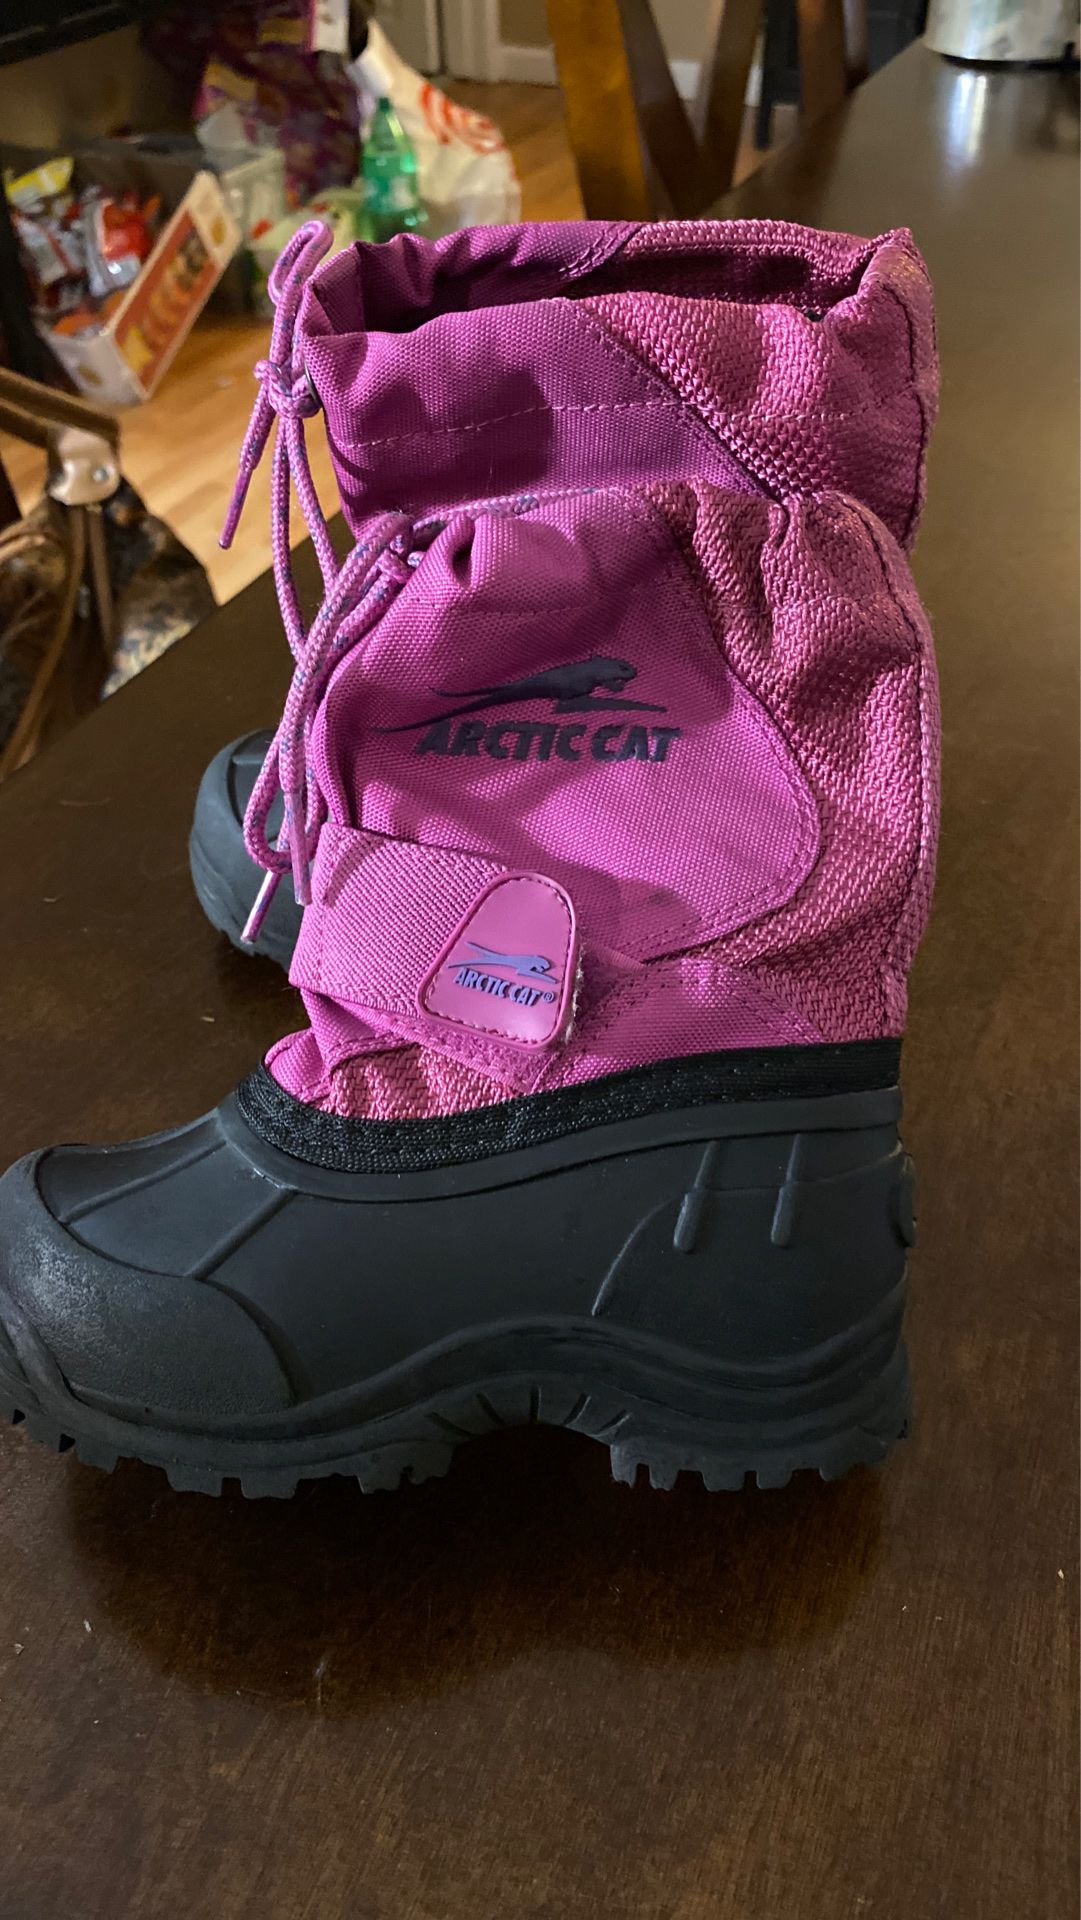 Arctic Cat Girl Toddler size 8 snow boots